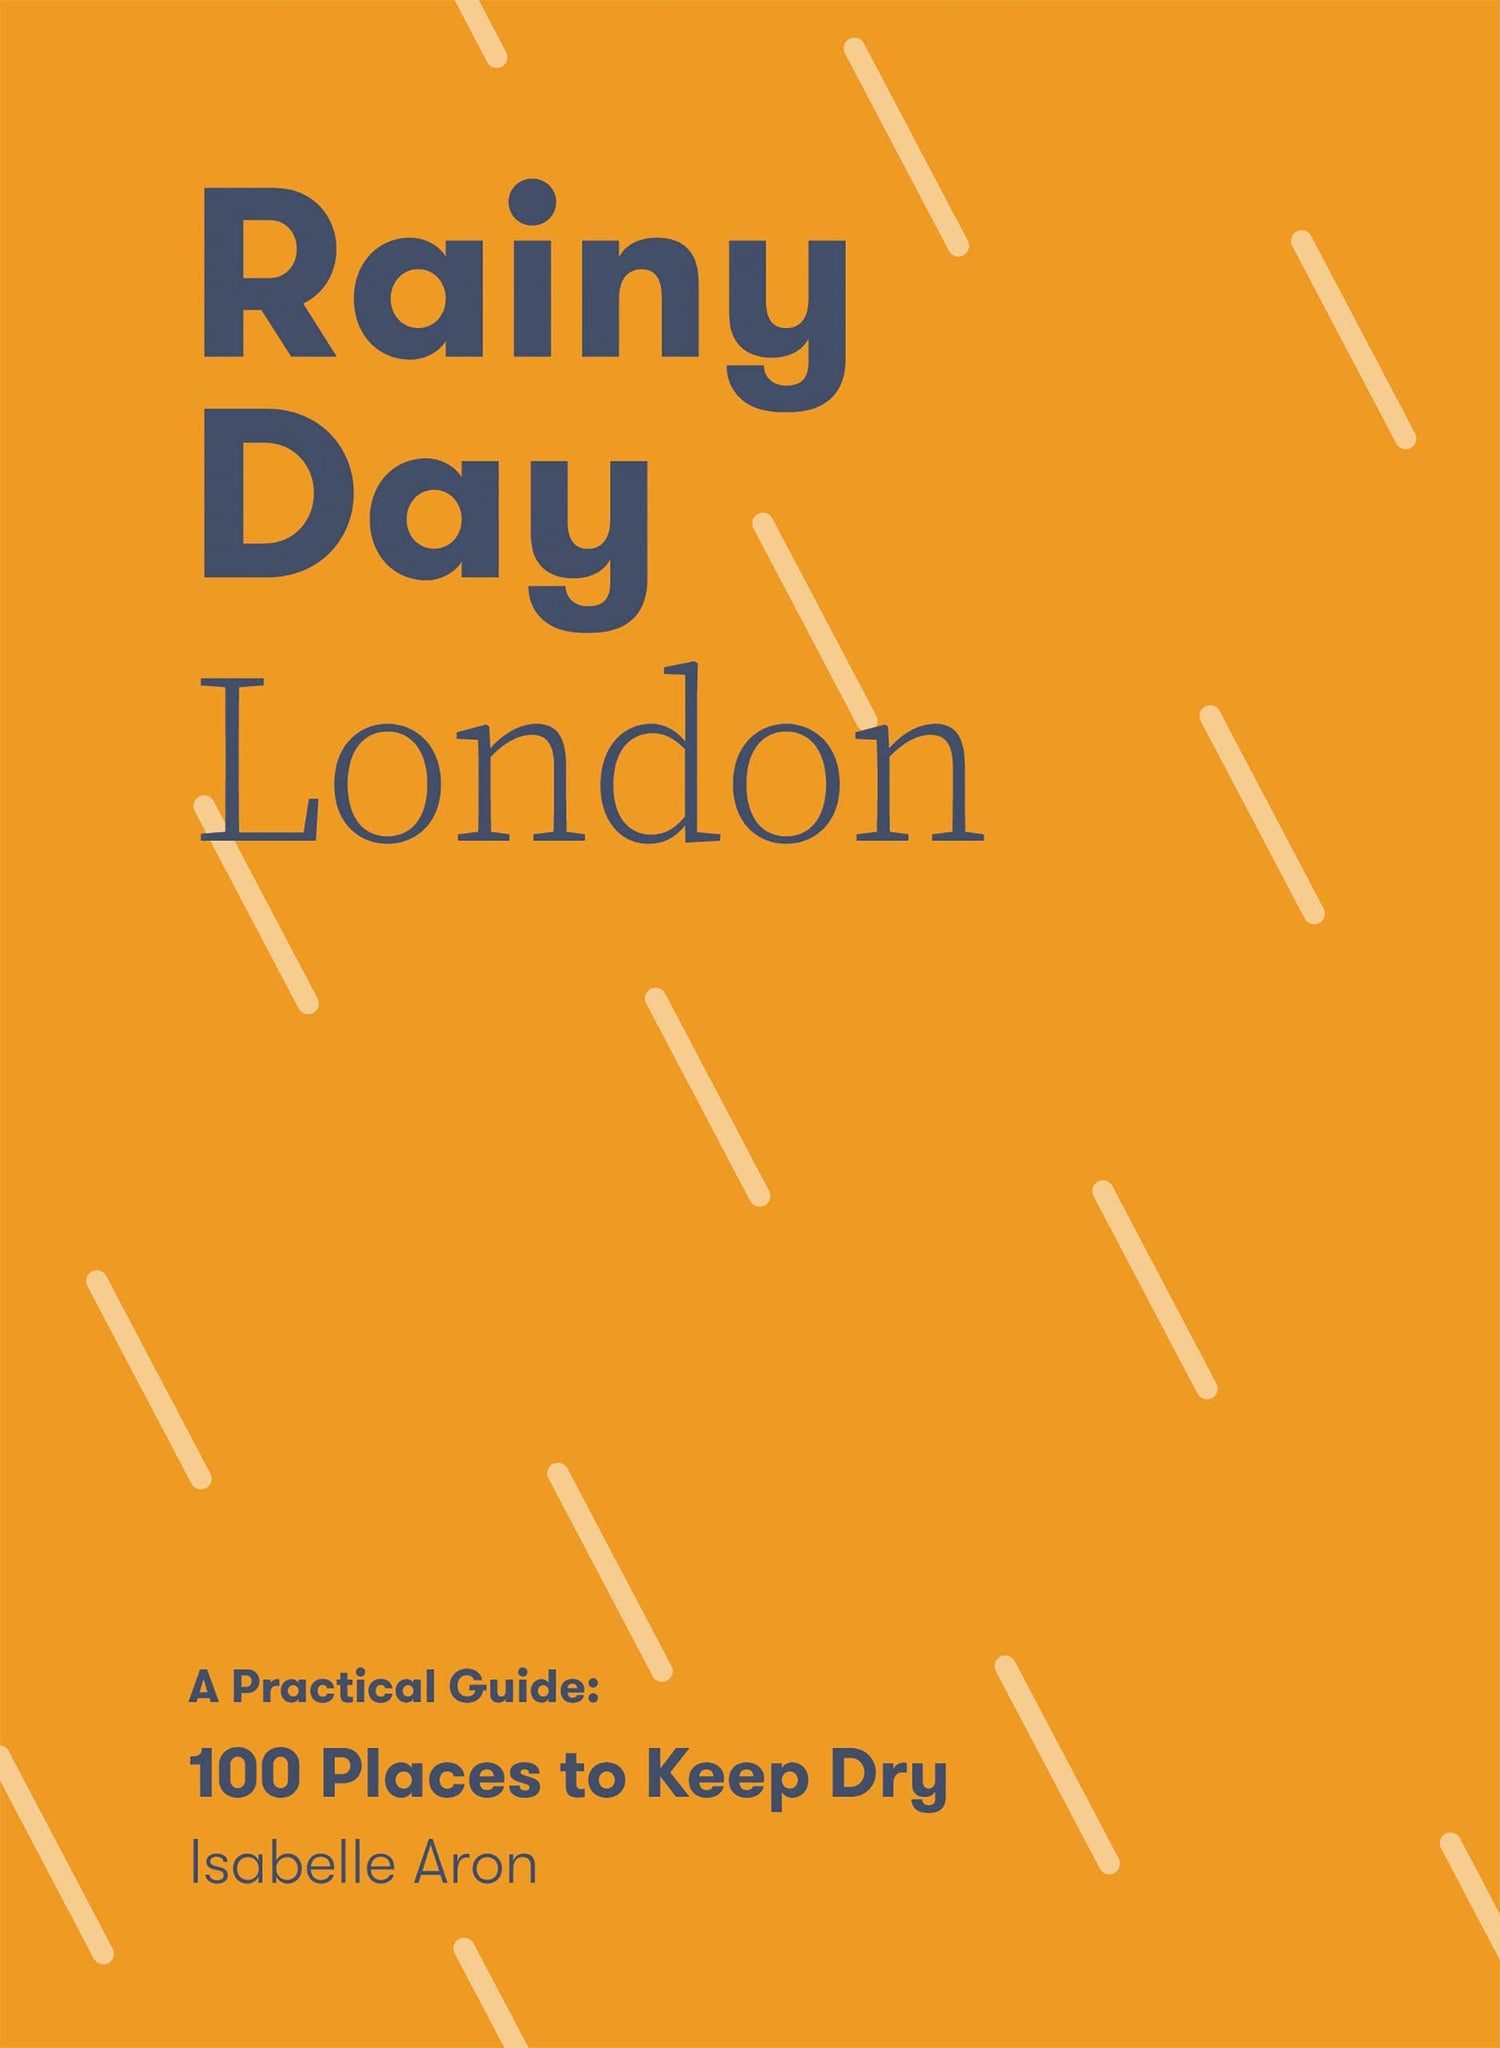 Rainy Day London A Practical Guide: 100 Places To Keep Dry